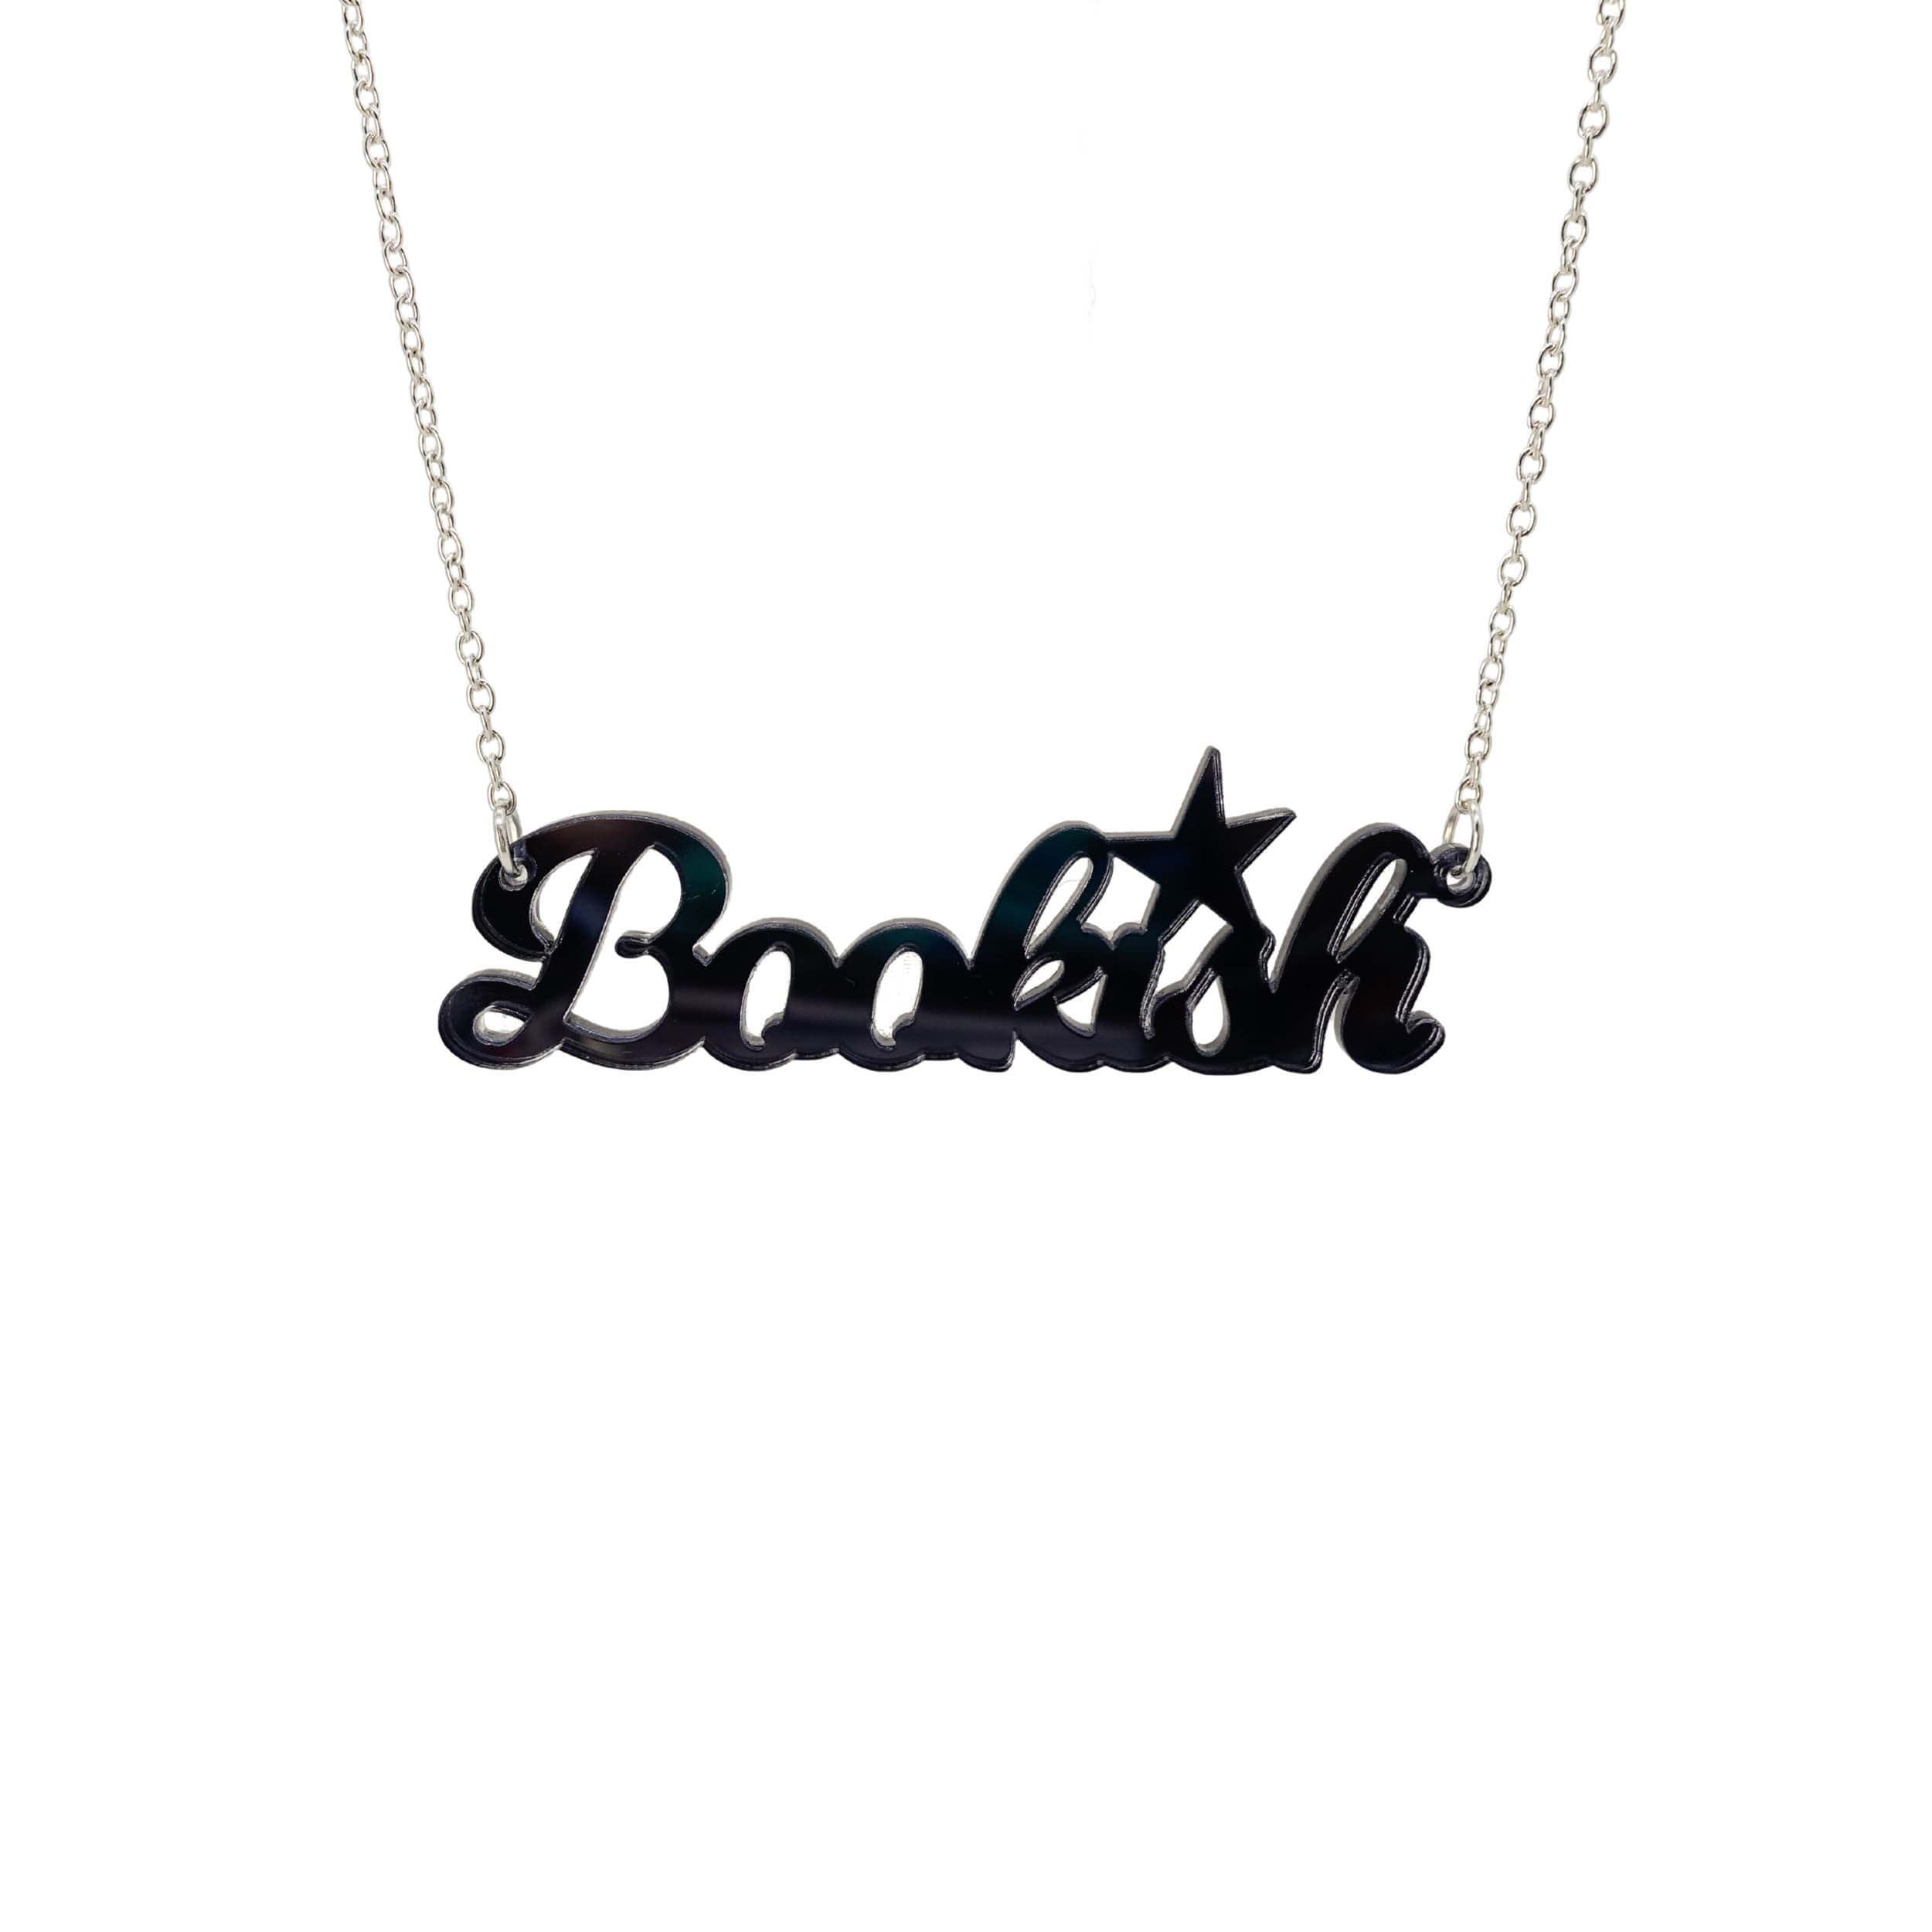 Slate mirror Bookish necklace shown against a white background. 